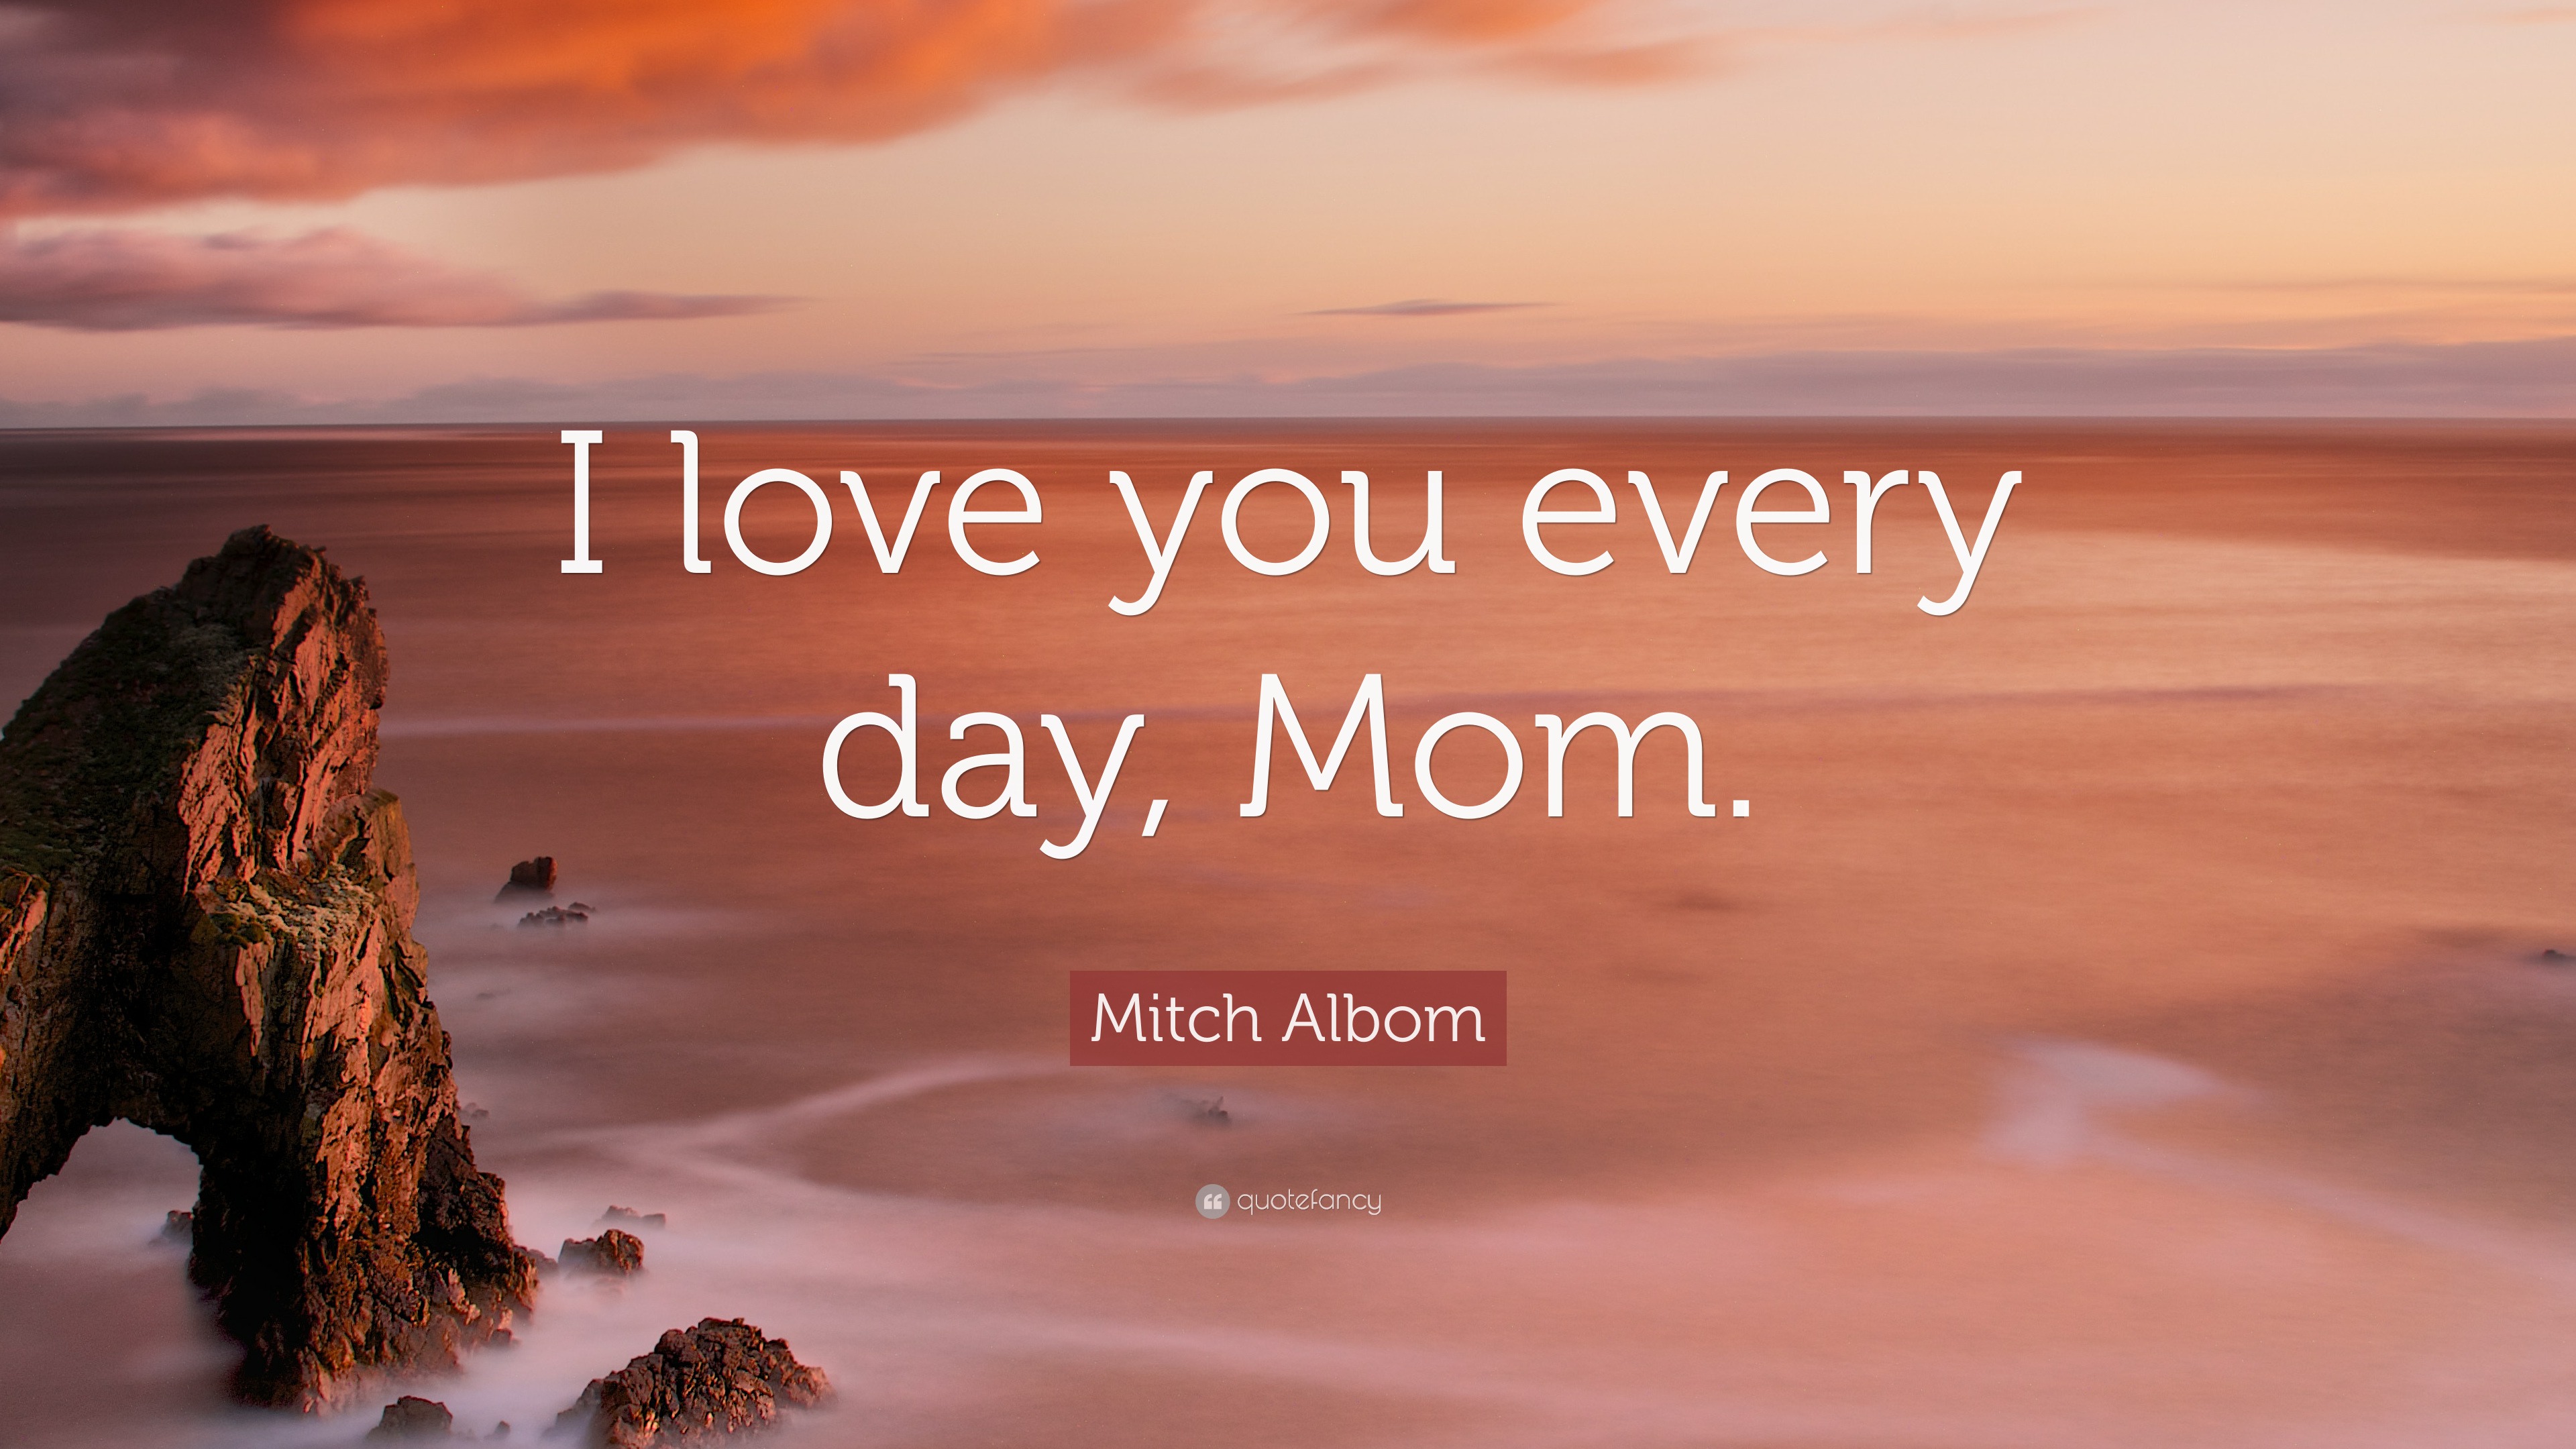 Mitch Albom Quote: "I love you every day, Mom." (7 ...